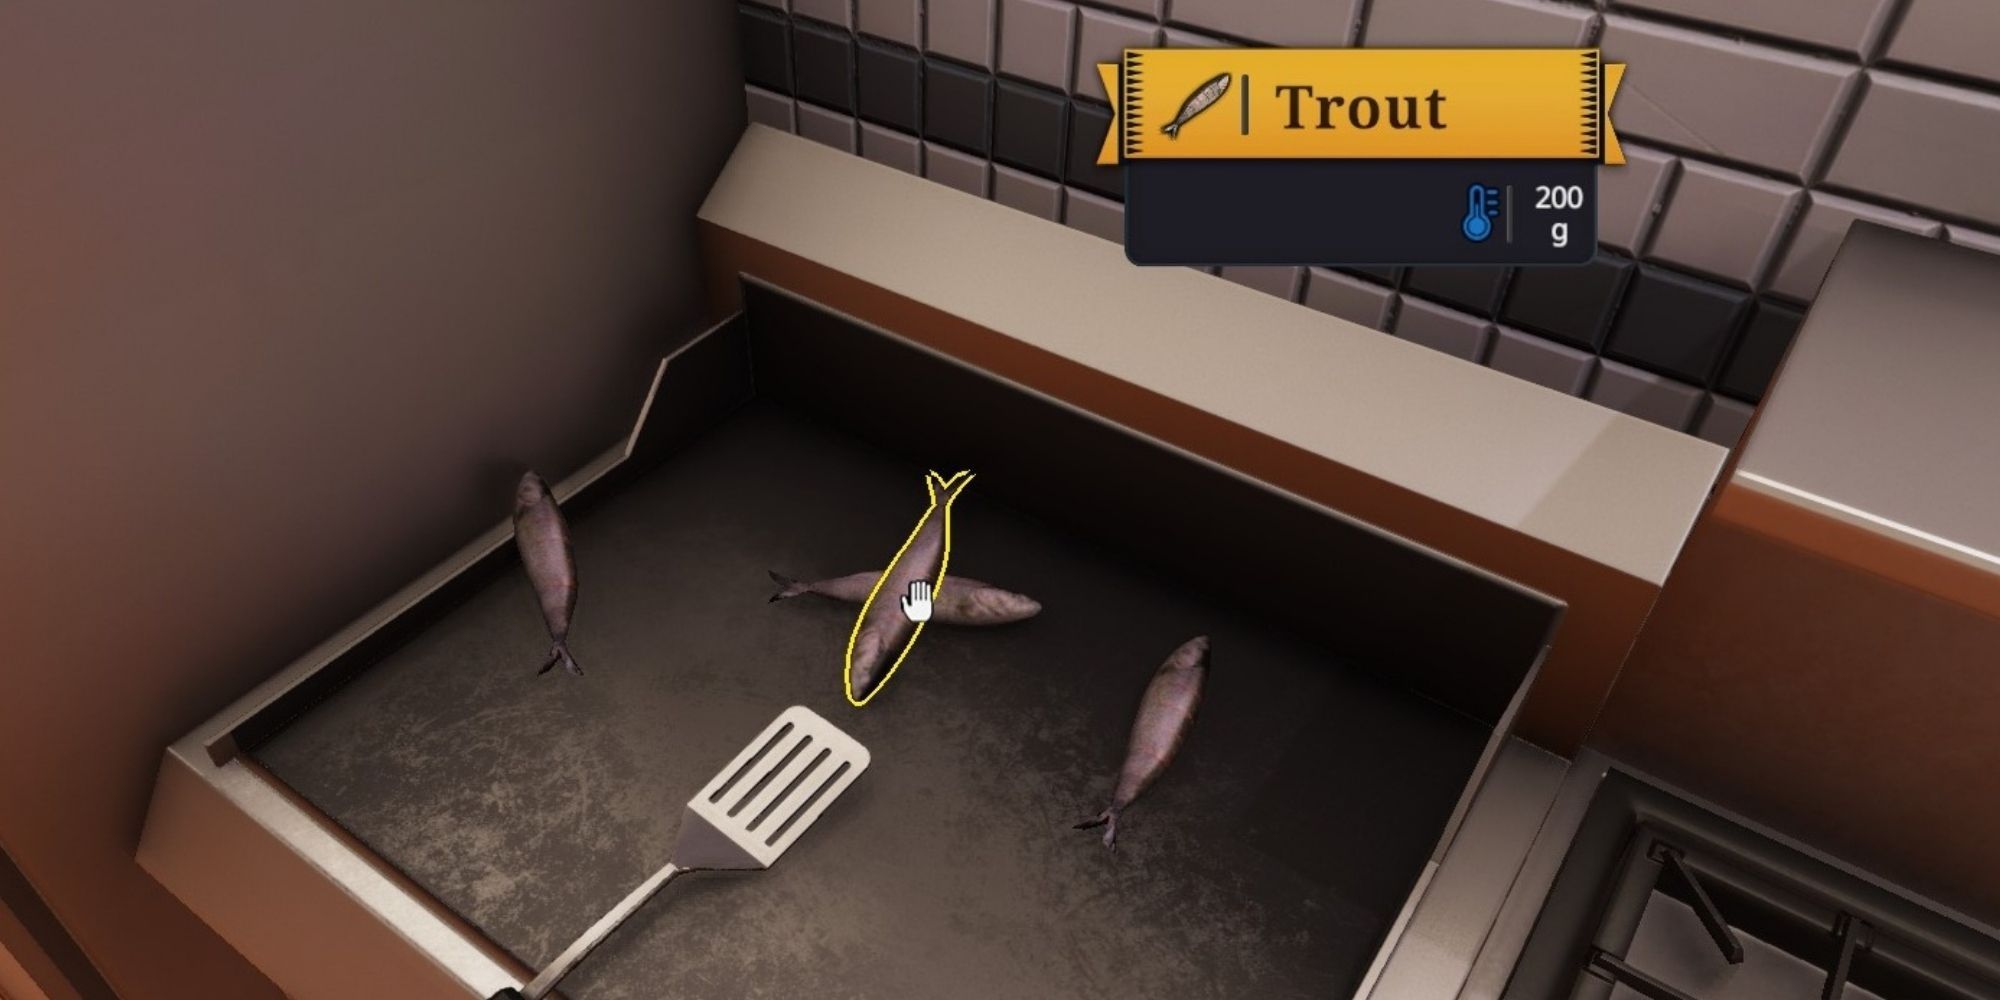 Cold Trout Left on Grill in Cooking Simulator